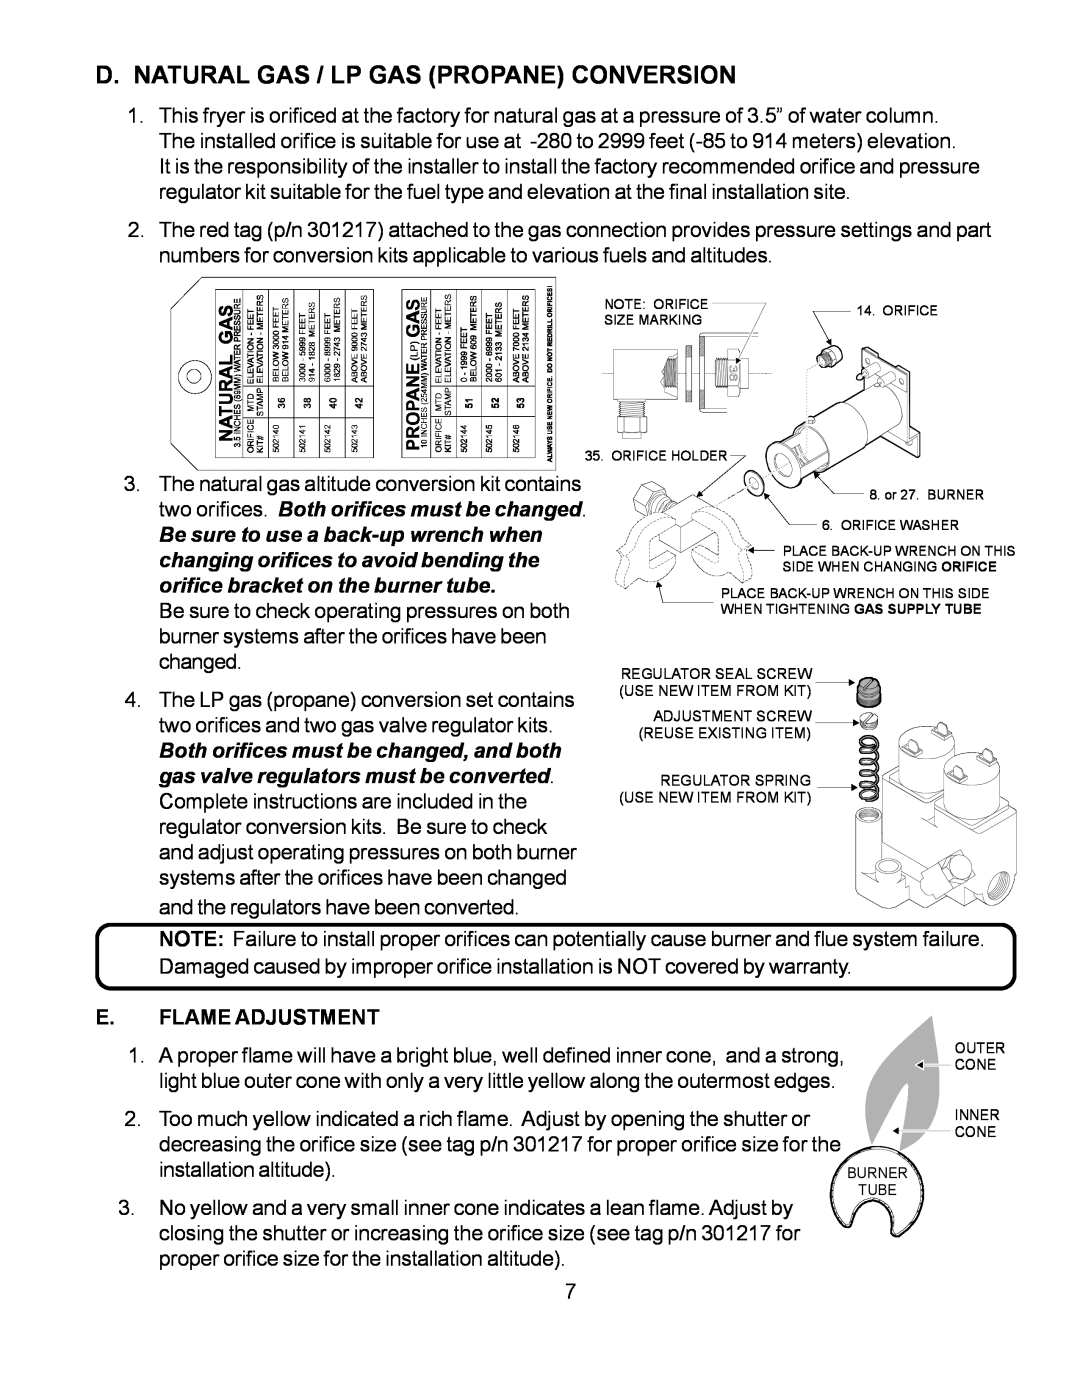 Wells WFGA-60FS service manual D. Natural Gas / Lp Gas Propane Conversion, two orifices. Both orifices must be changed 